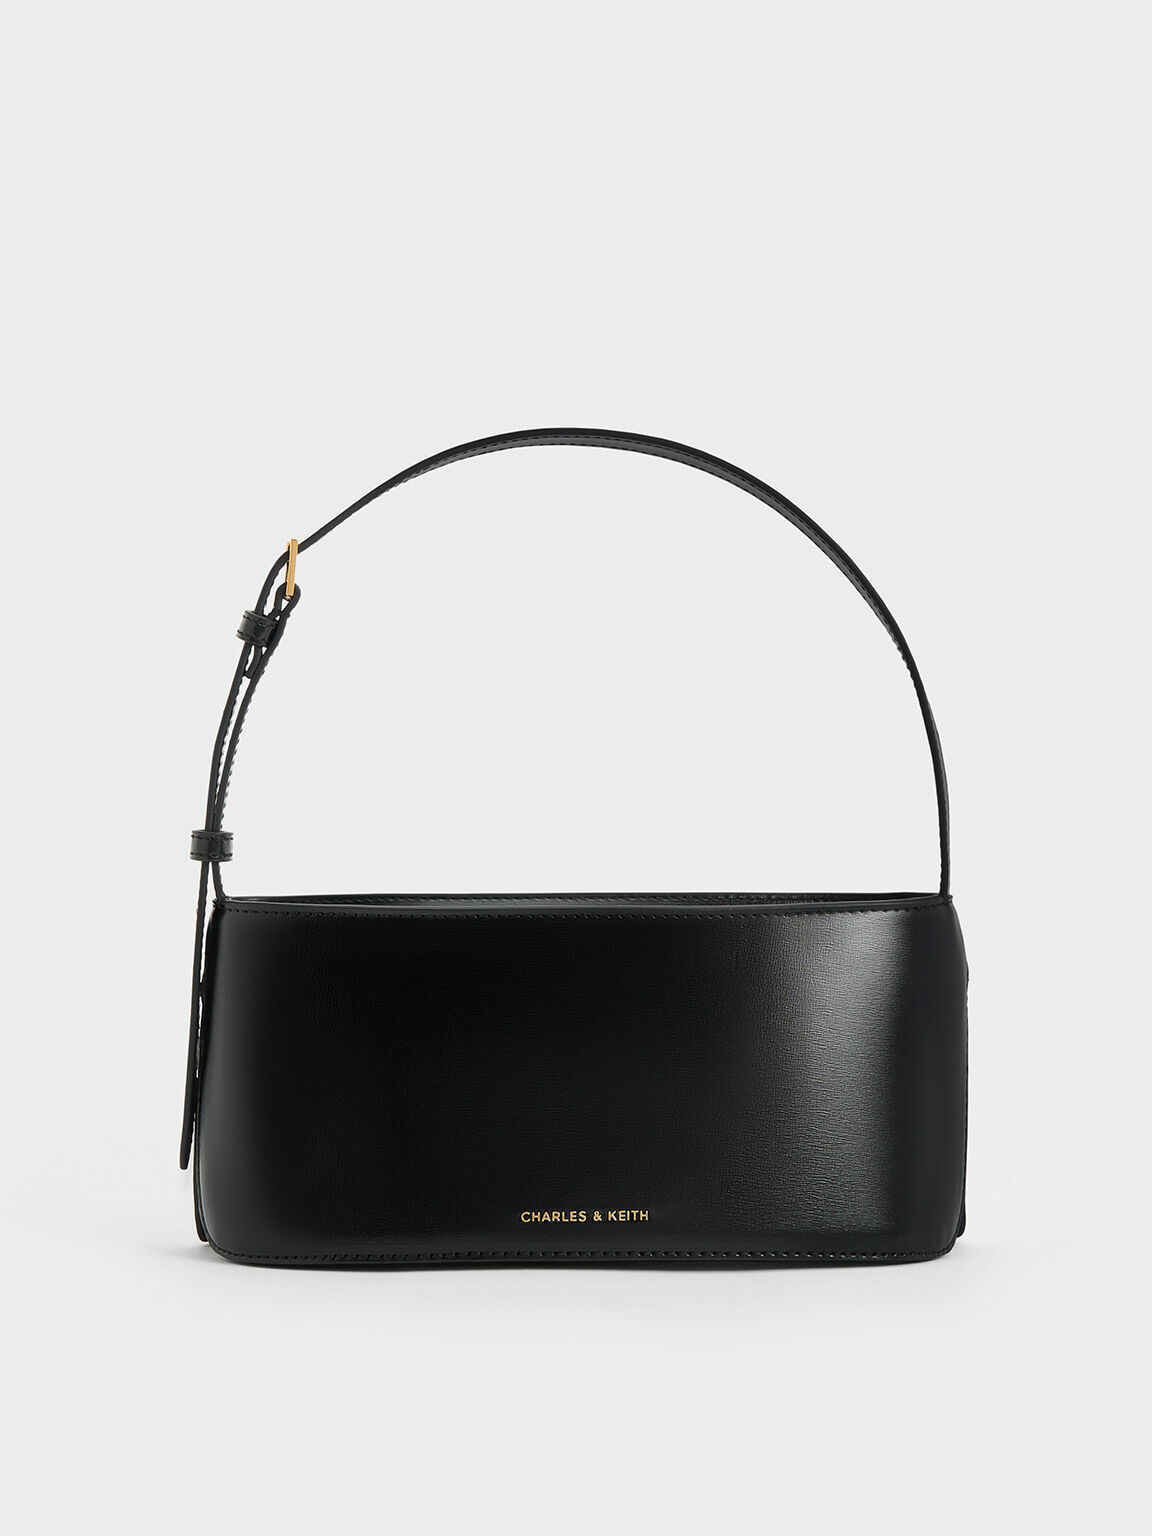 Women's New Arrival Bags | Latest Styles | CHARLES & KEITH IN